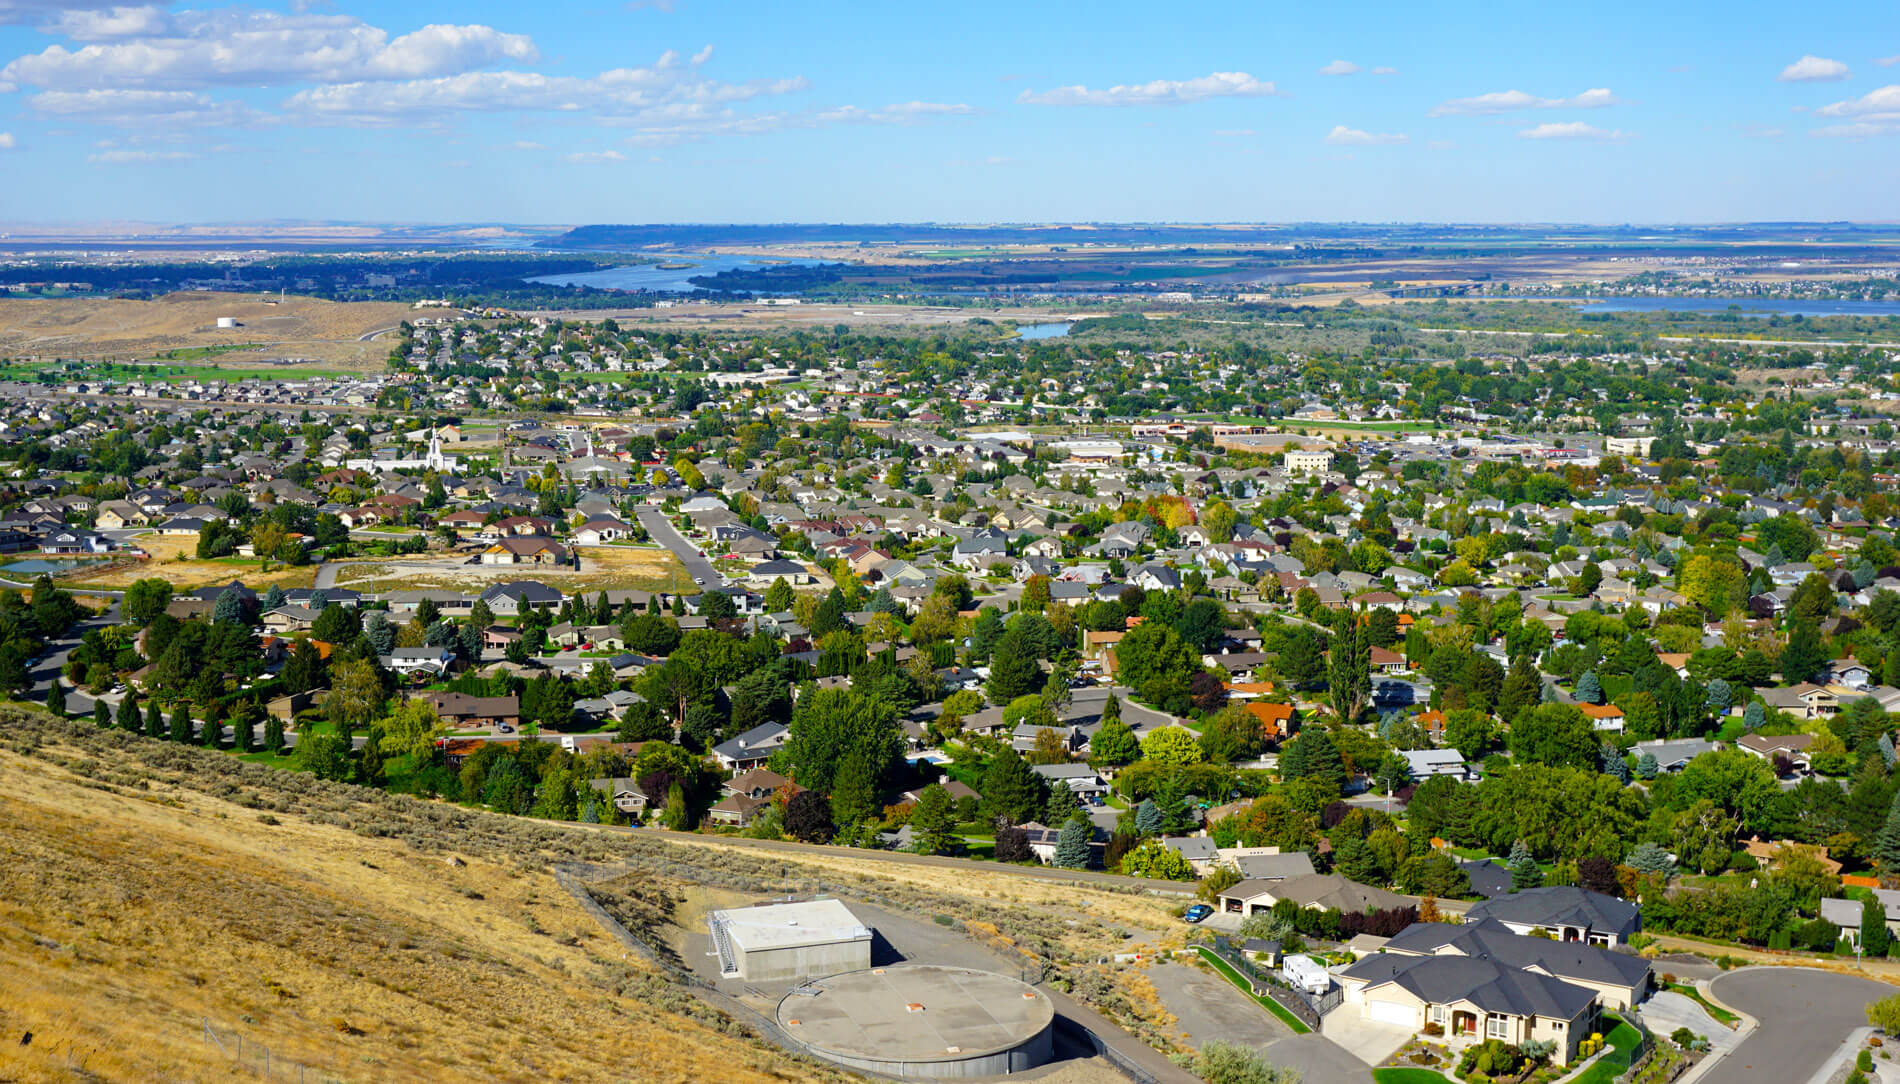 Overview of Tri-Cities